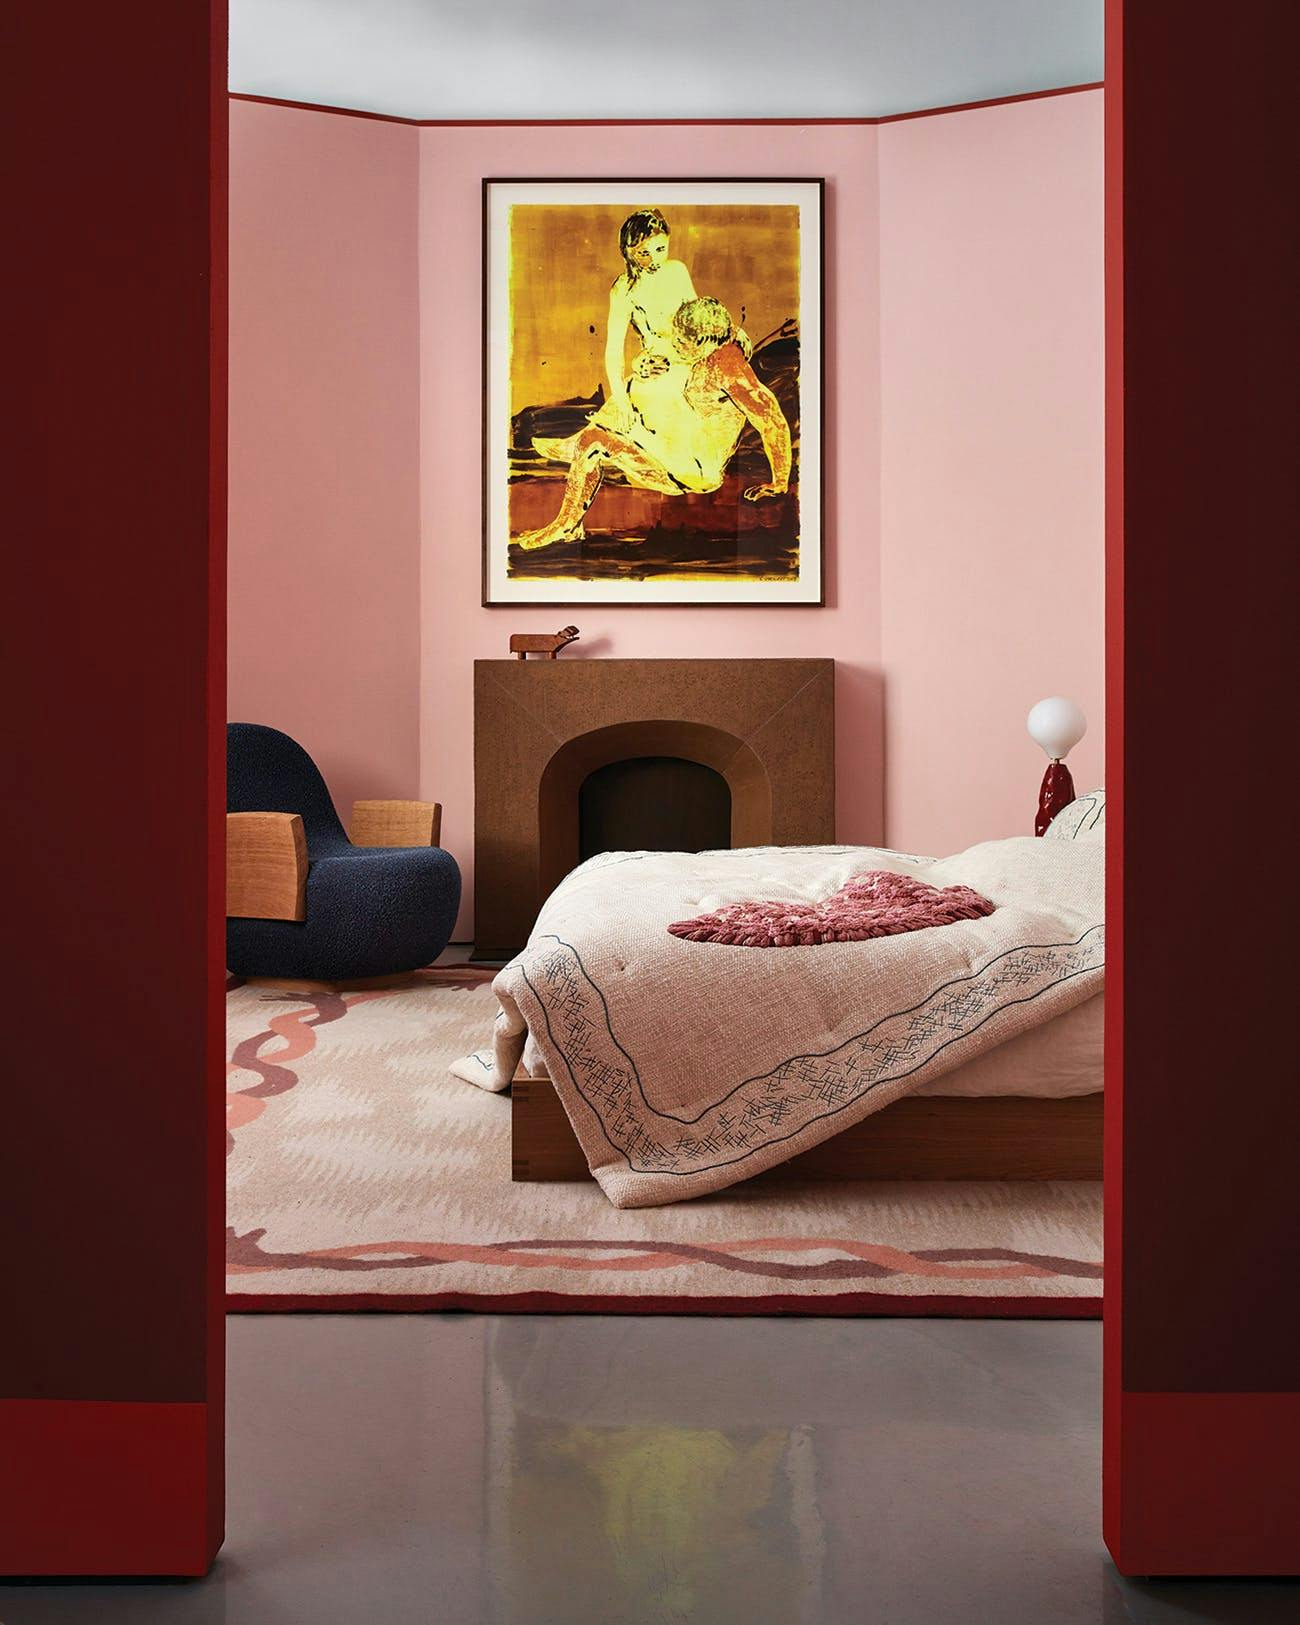 Bedroom from "LOVE," photographed by Steven Kent Johnson.